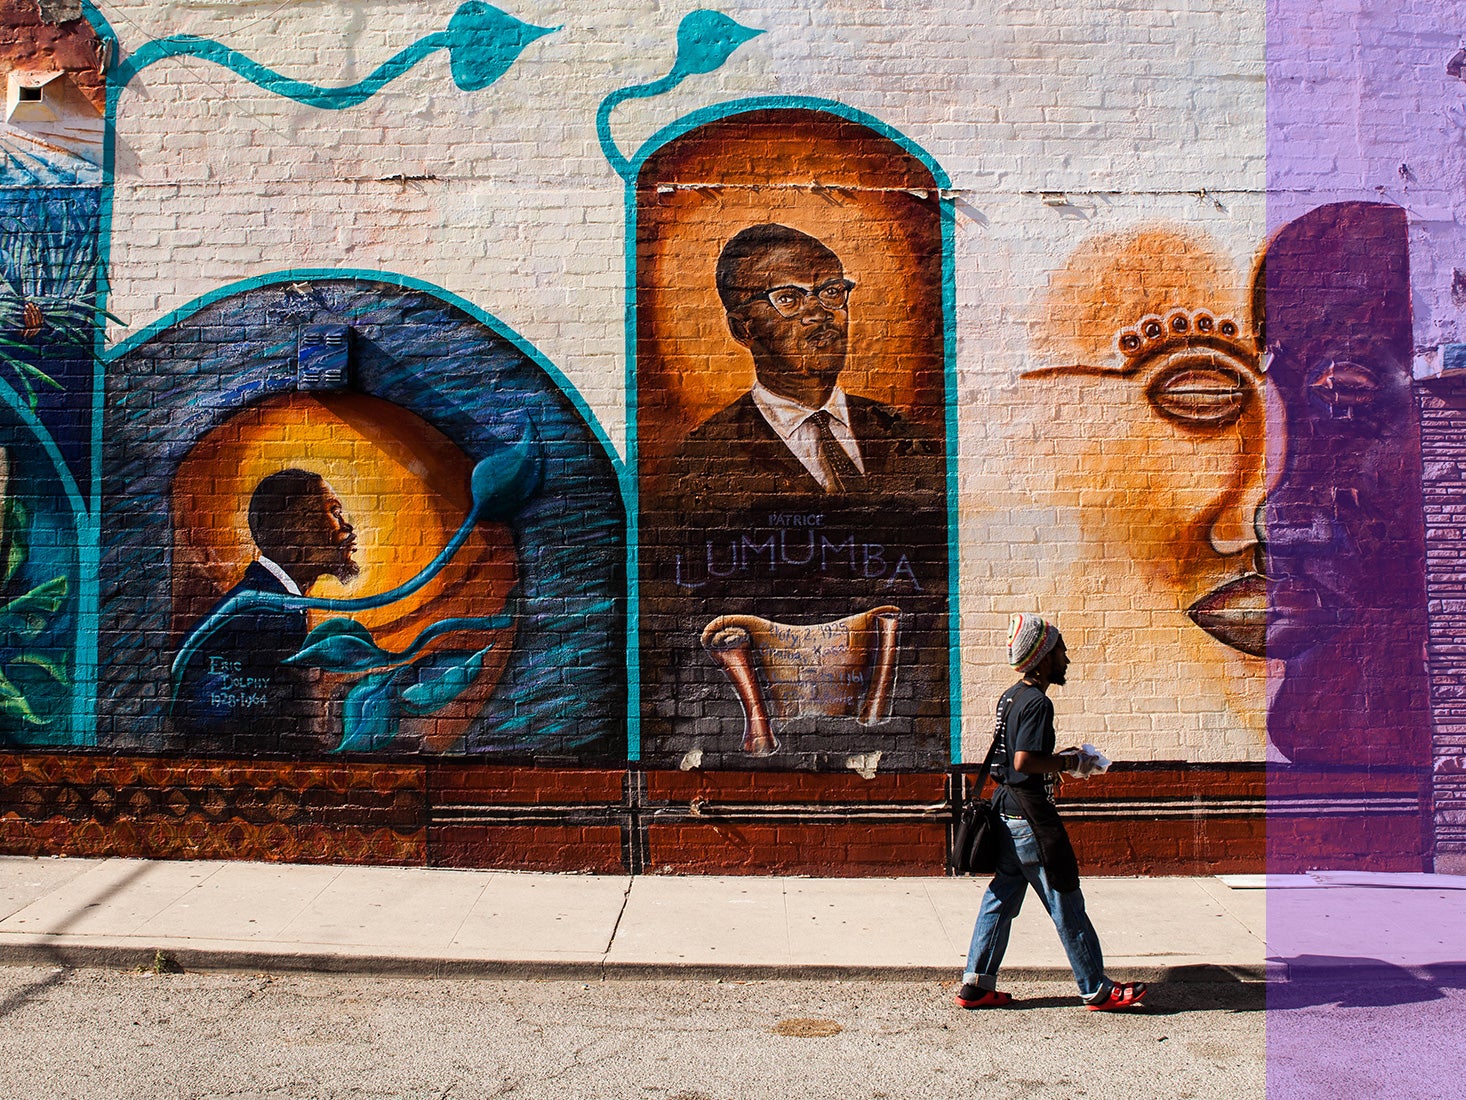 A woman walks by a large mural in the Liemert Park Village section of L.A.